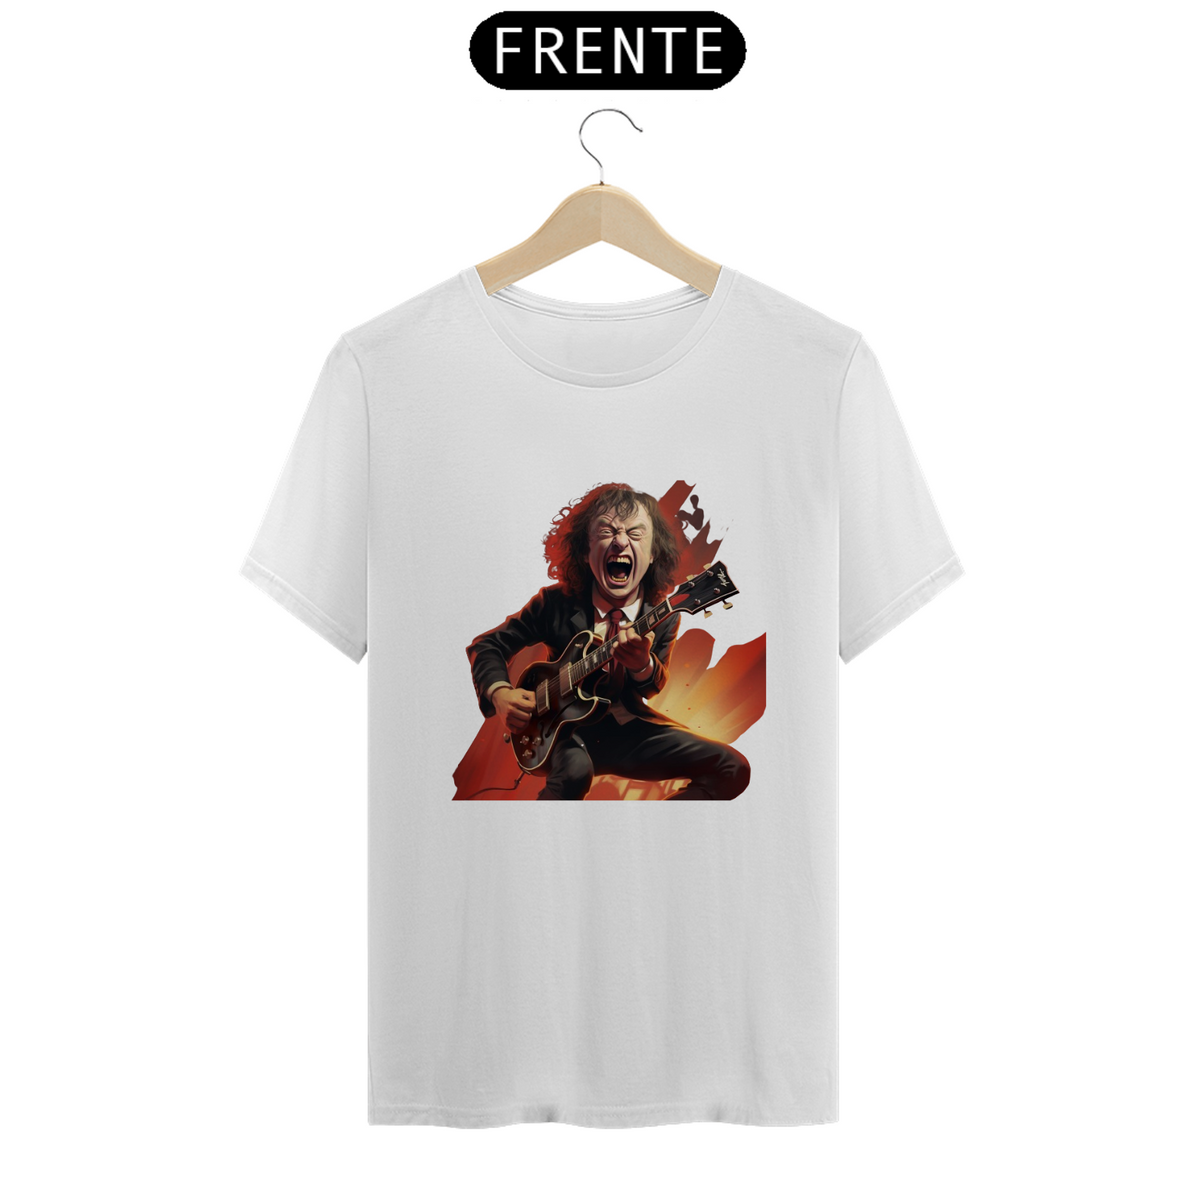 Nome do produto: Camiseta Monsters of Rock Angus Young